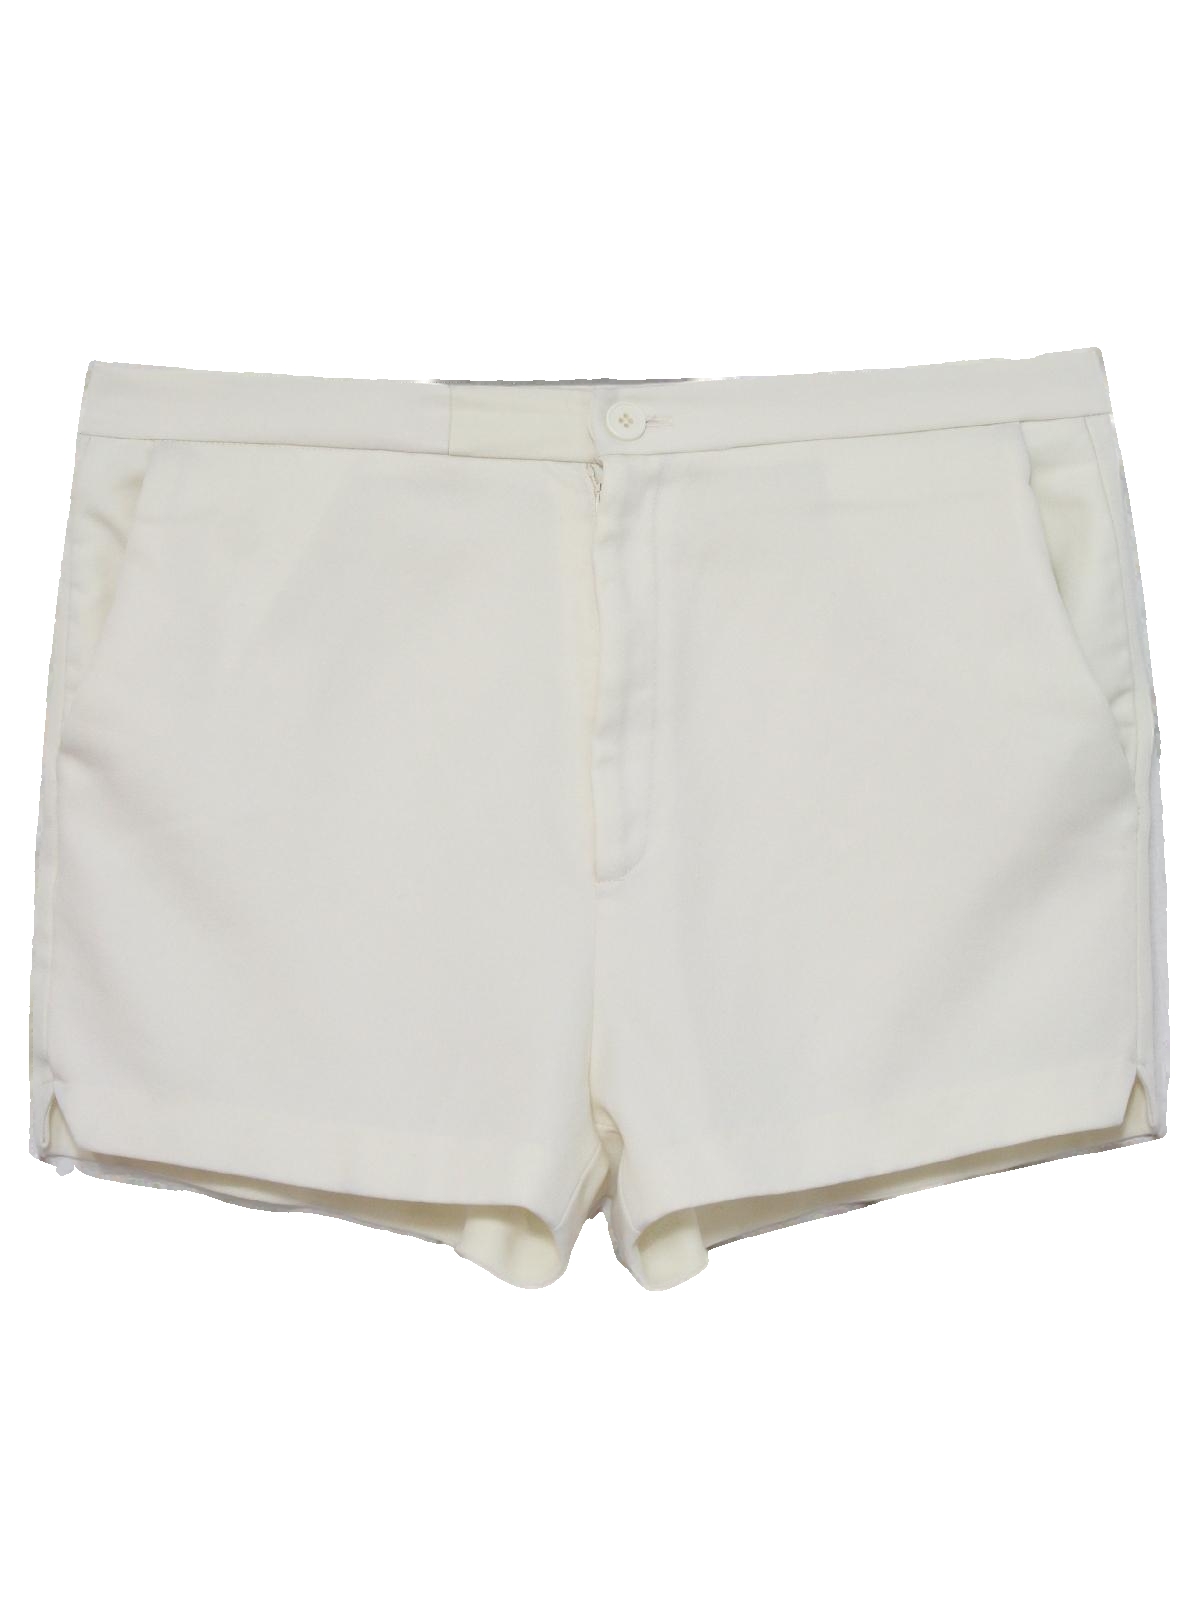 80s Vintage Home Sewn Shorts: 80s -Home Sewn- Mens cream background ...